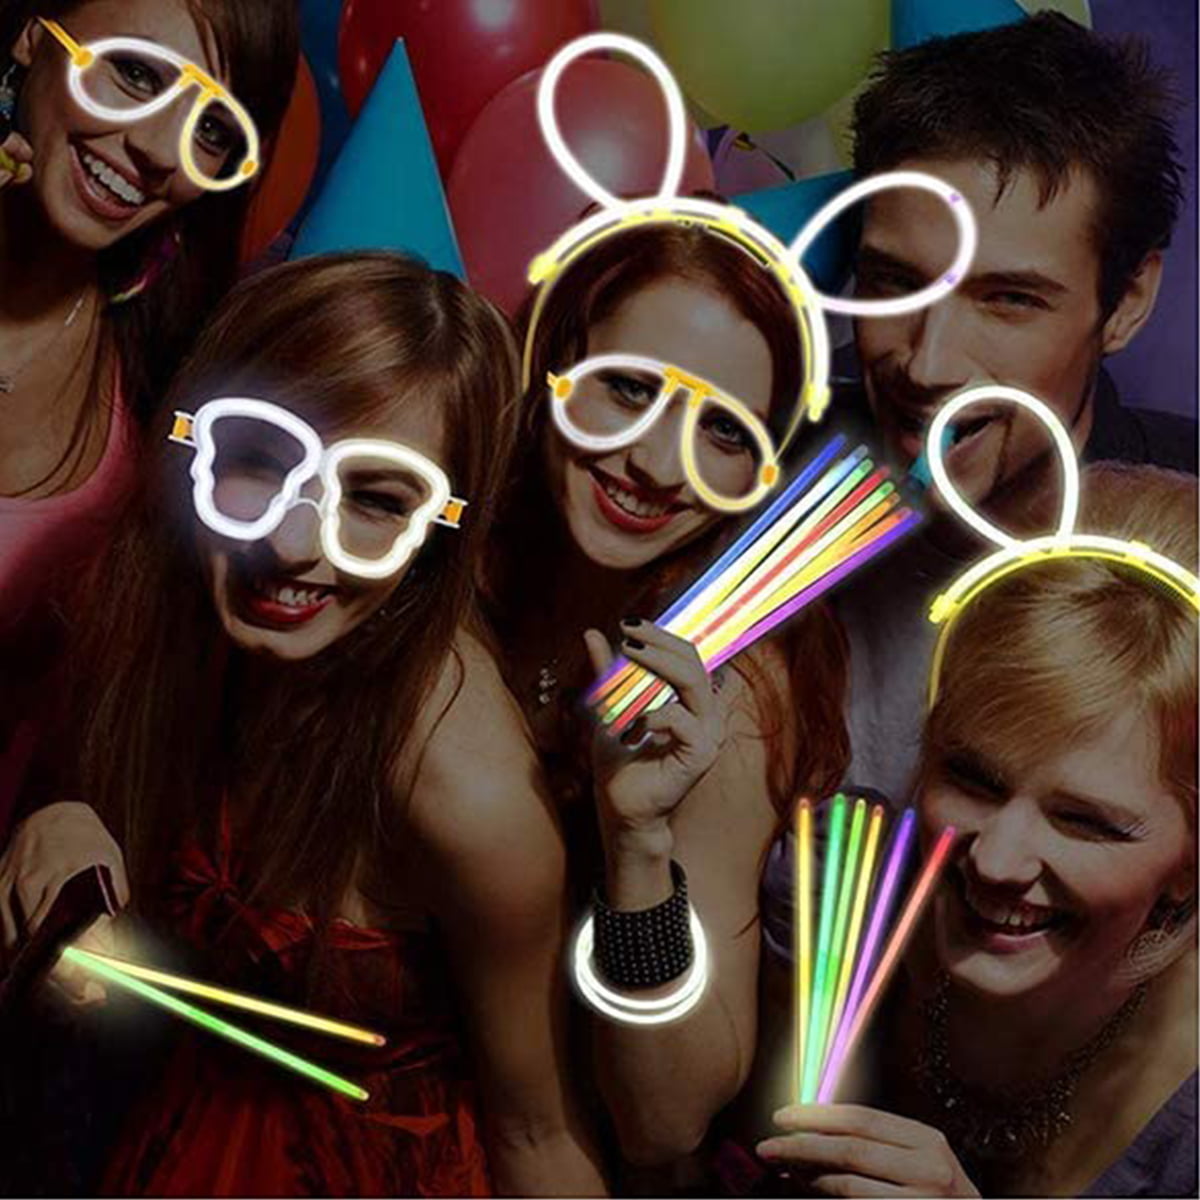 ABC 456 Pcs Glow Sticks Bulk Halloween Birthday Party Concert Pack Gifts  Ultra Bright Glow in The Dark 7 Colors Neon Party Supplies Basket Stuffers  Glow Bracelet with Connectors for Kids Adults 